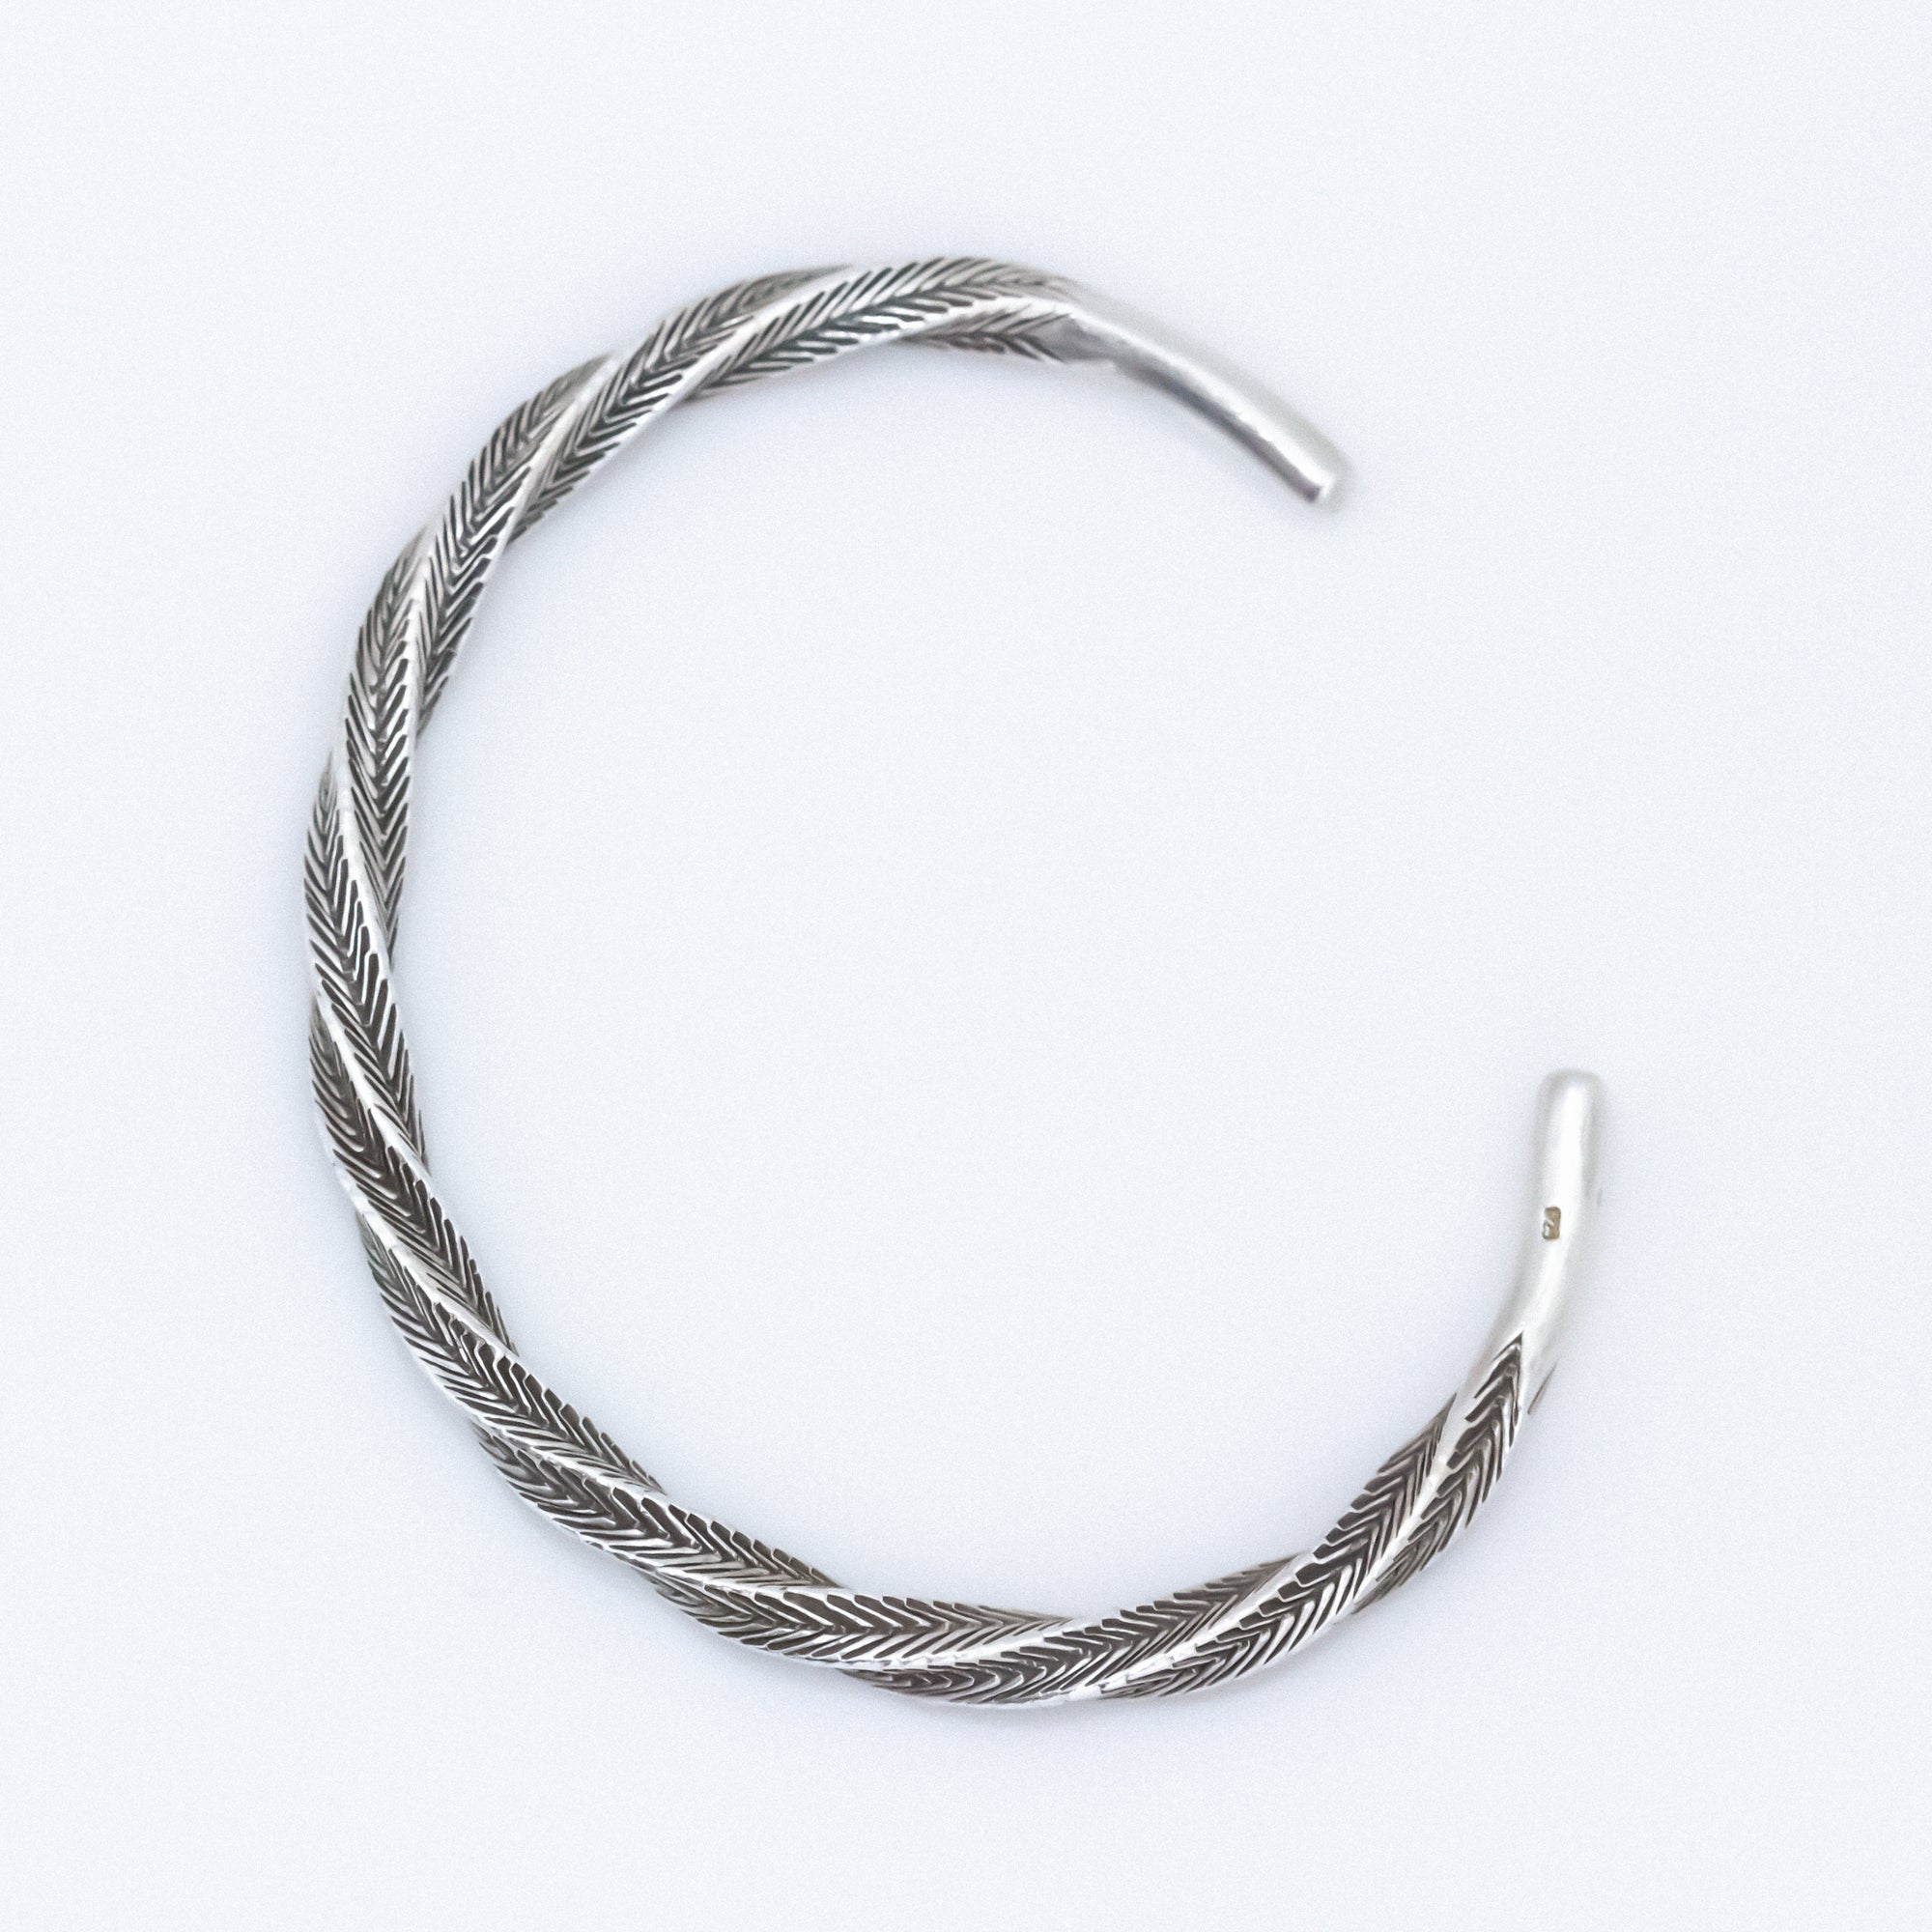 Feathered Twist Sterling Silver Bangle